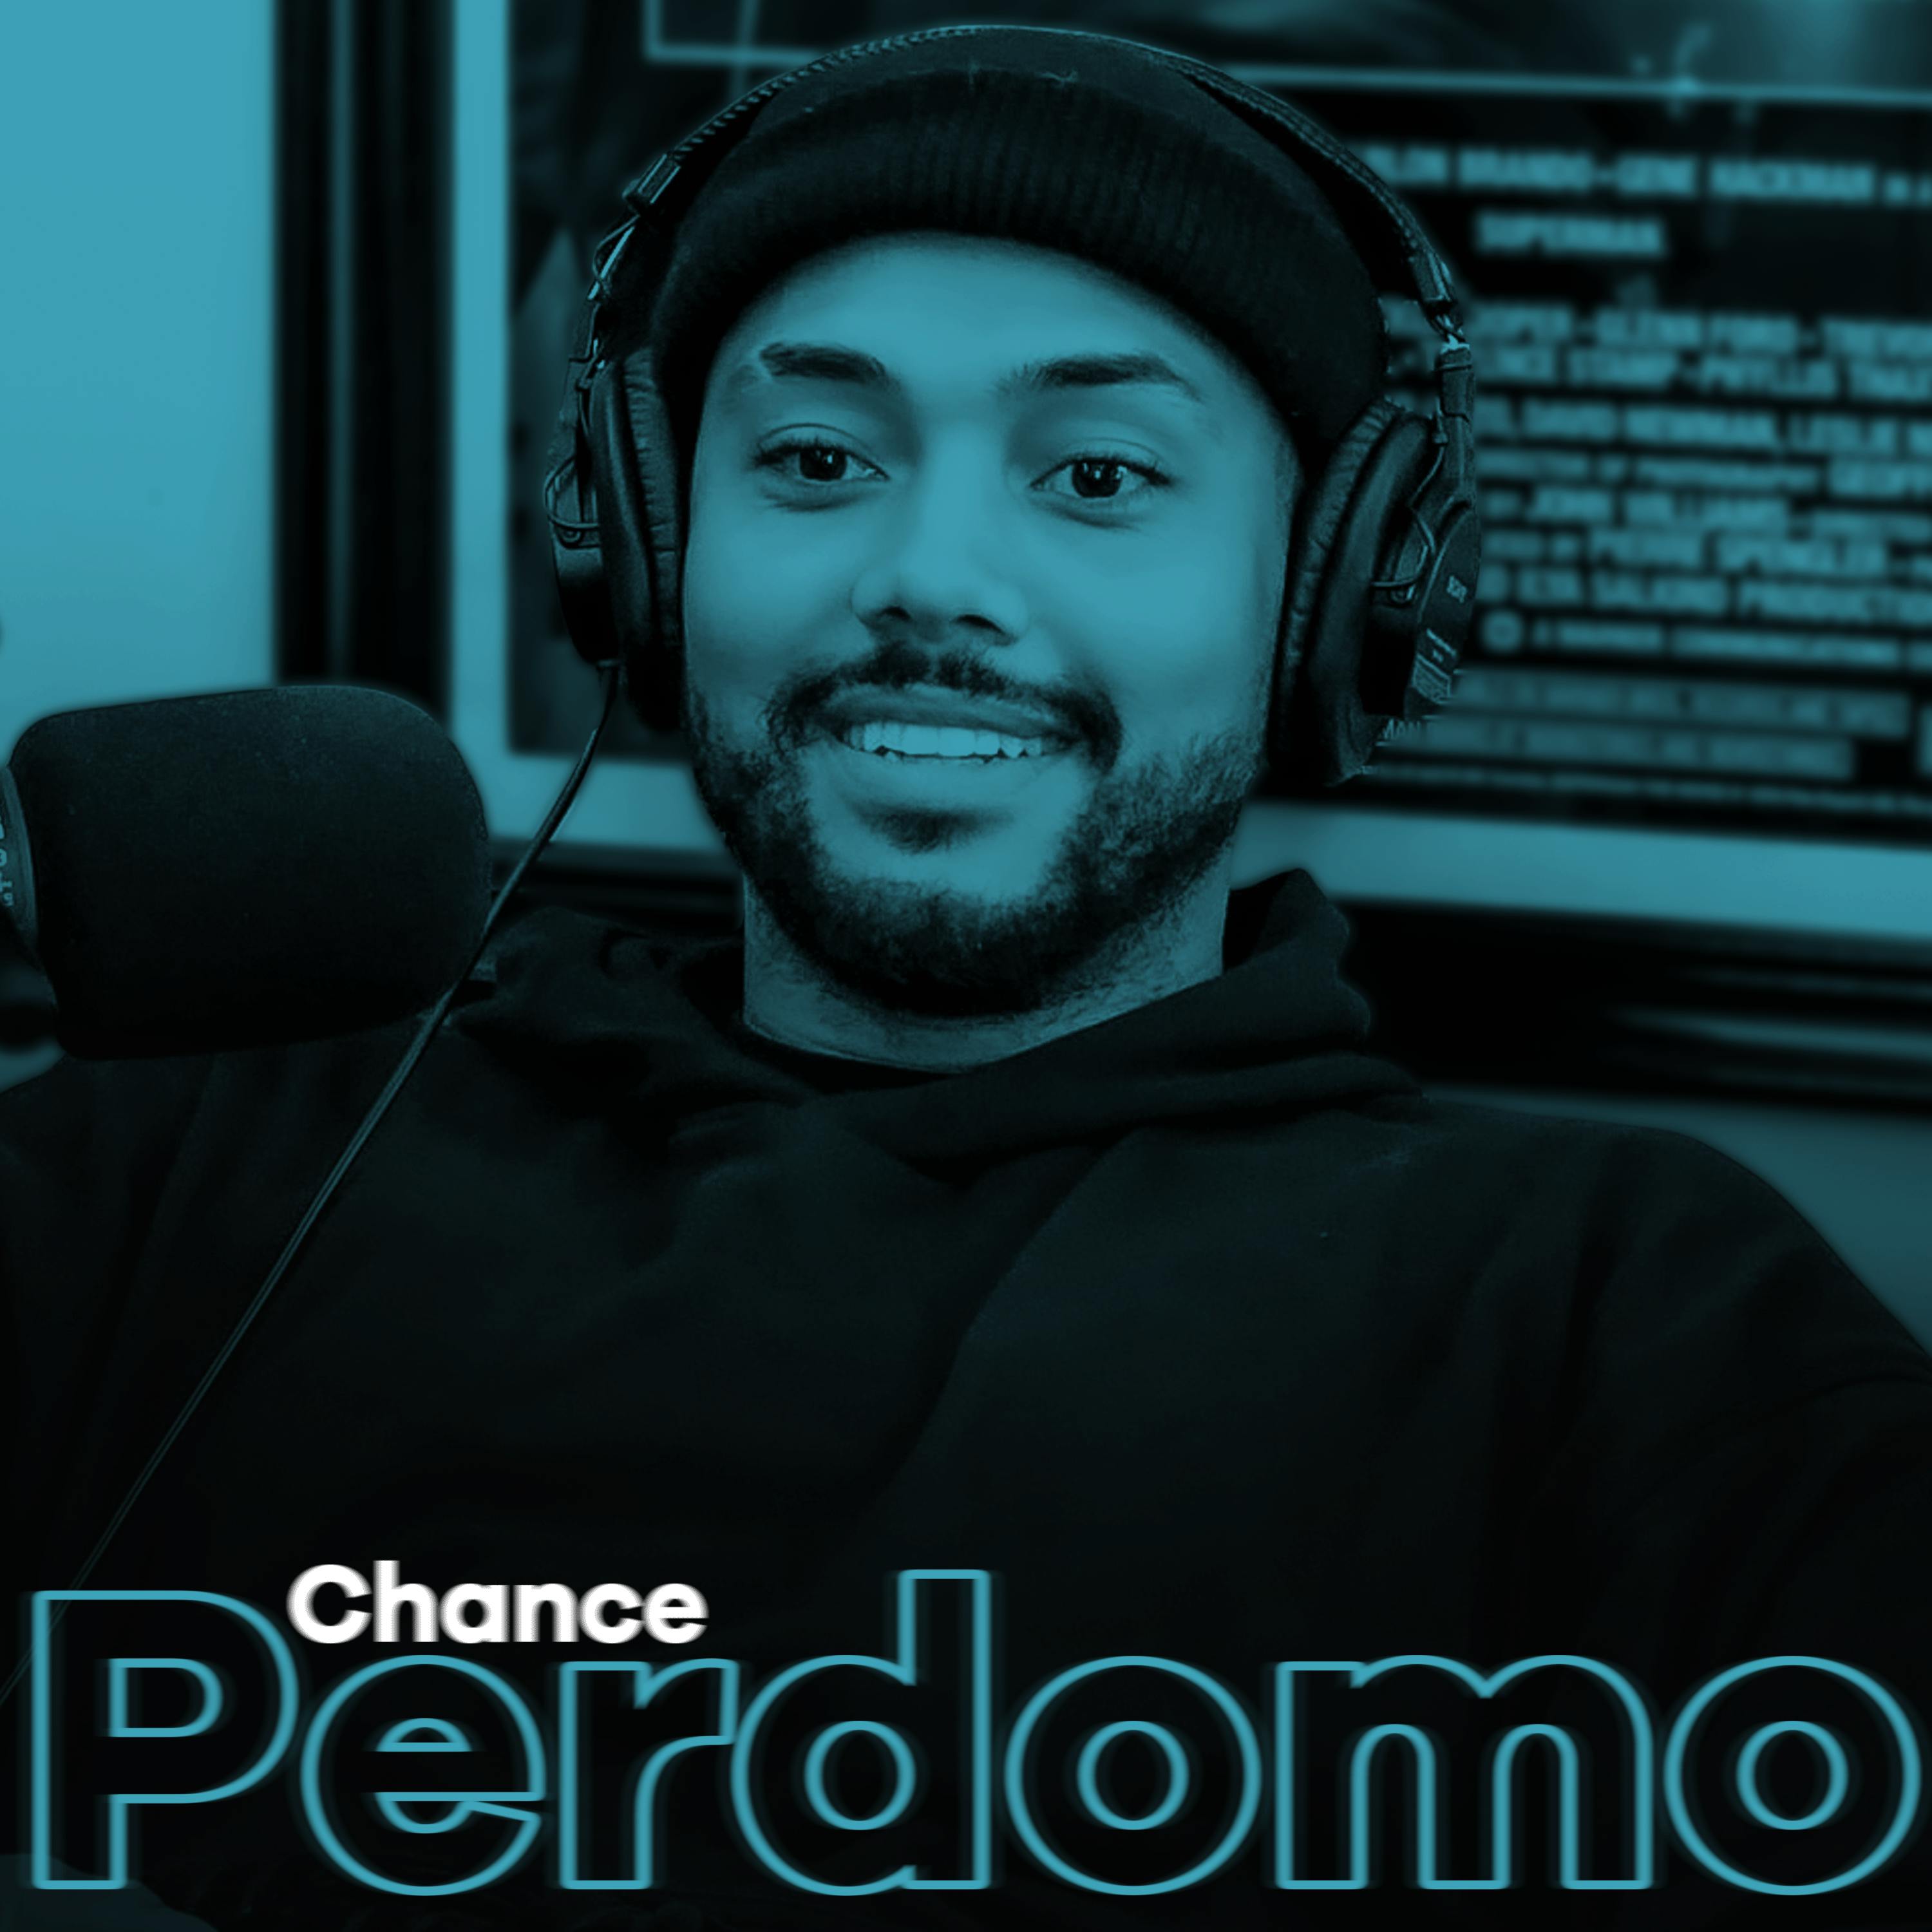 CHANCE PERDOMO: Emulating Tom Cruise, The Boys Spin-off Expectations & Leaving Law School to Act